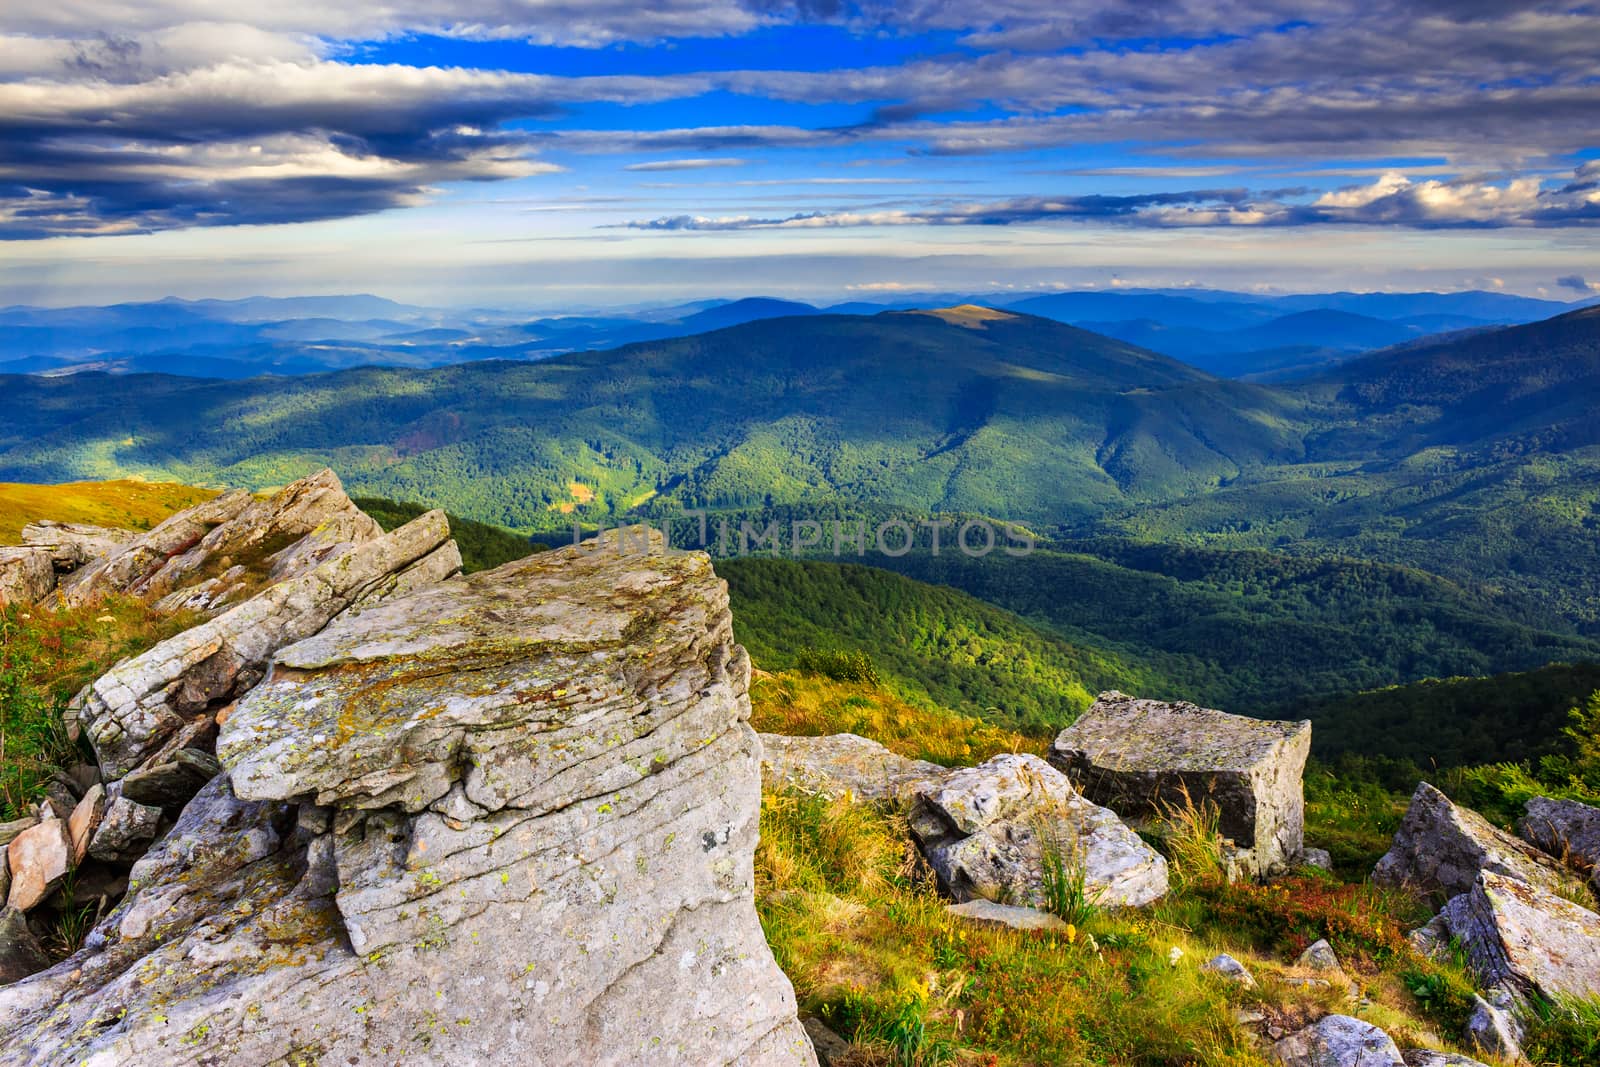 giant stones on the top of mountain meadowslandscape by Pellinni